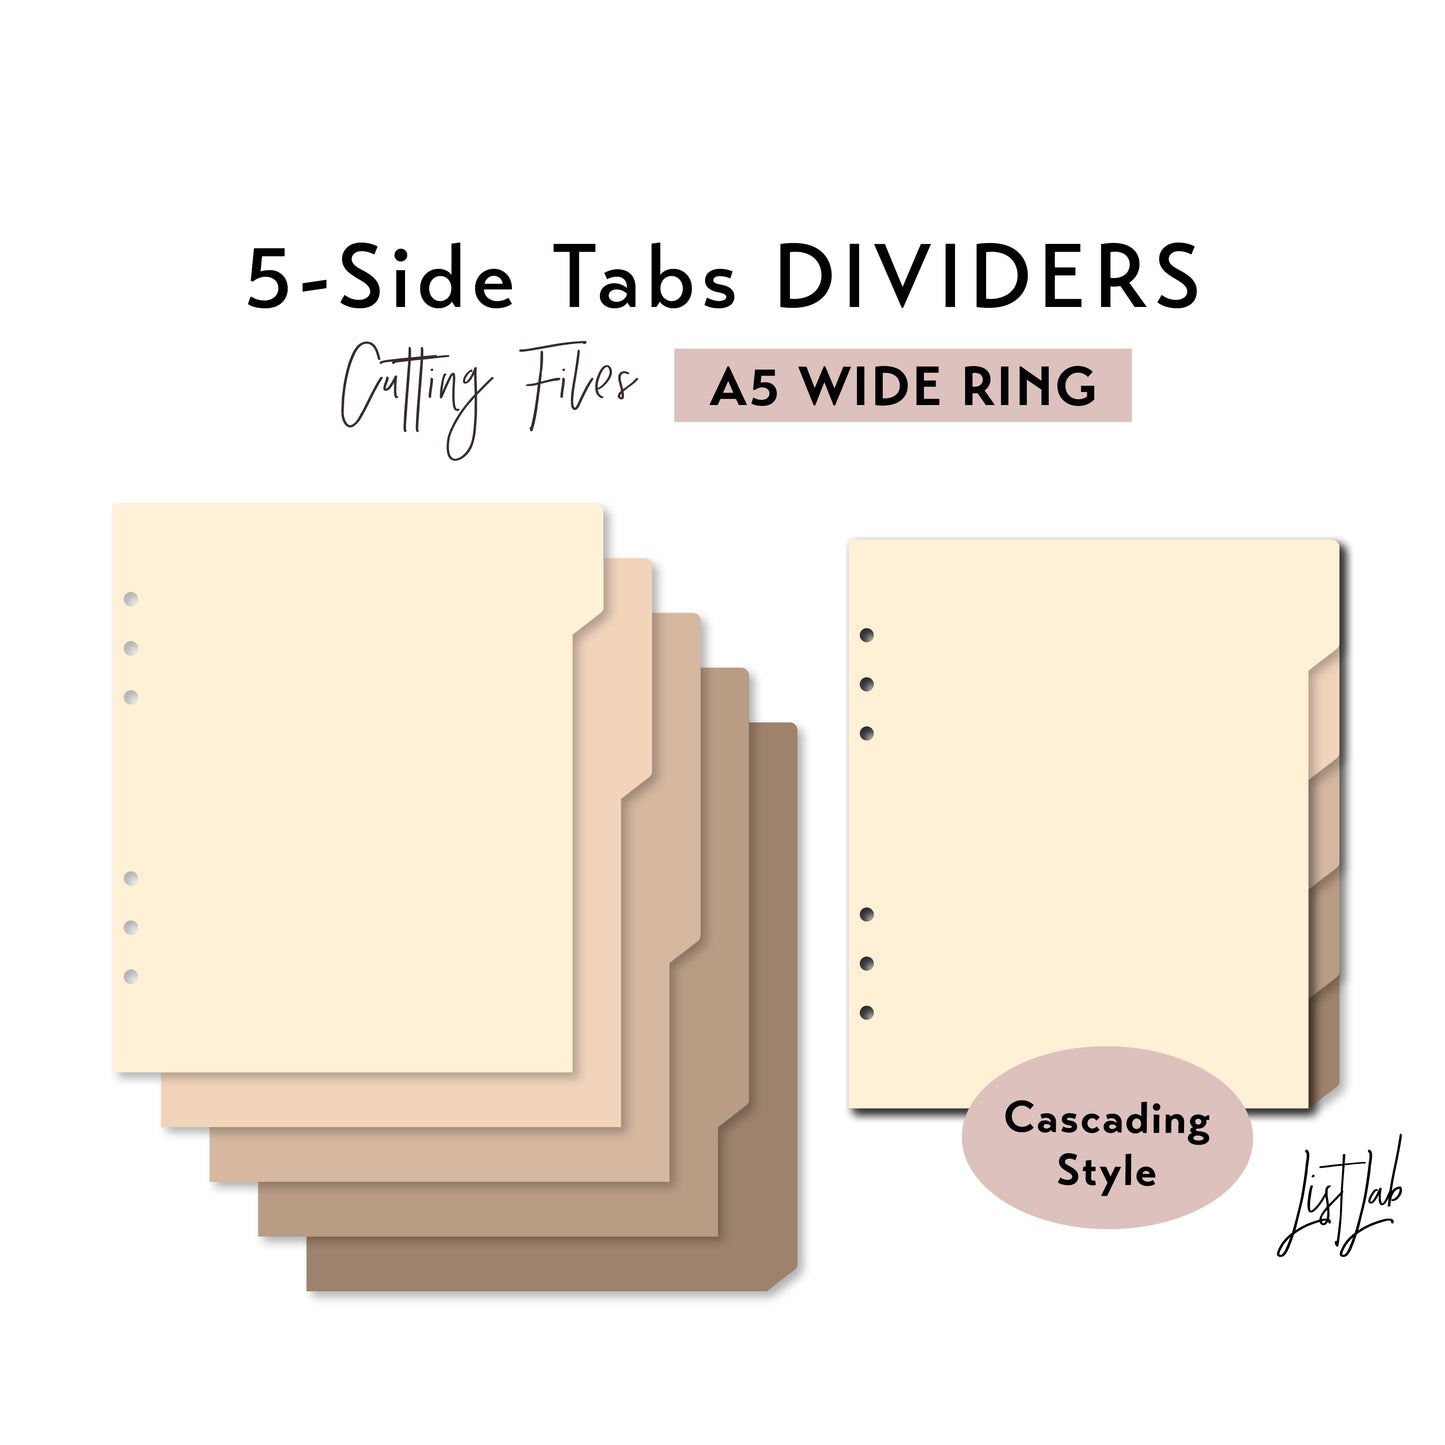 A5 WIDE Ring size 5-SIDE Cascading Tab Dividers Cutting Files Set